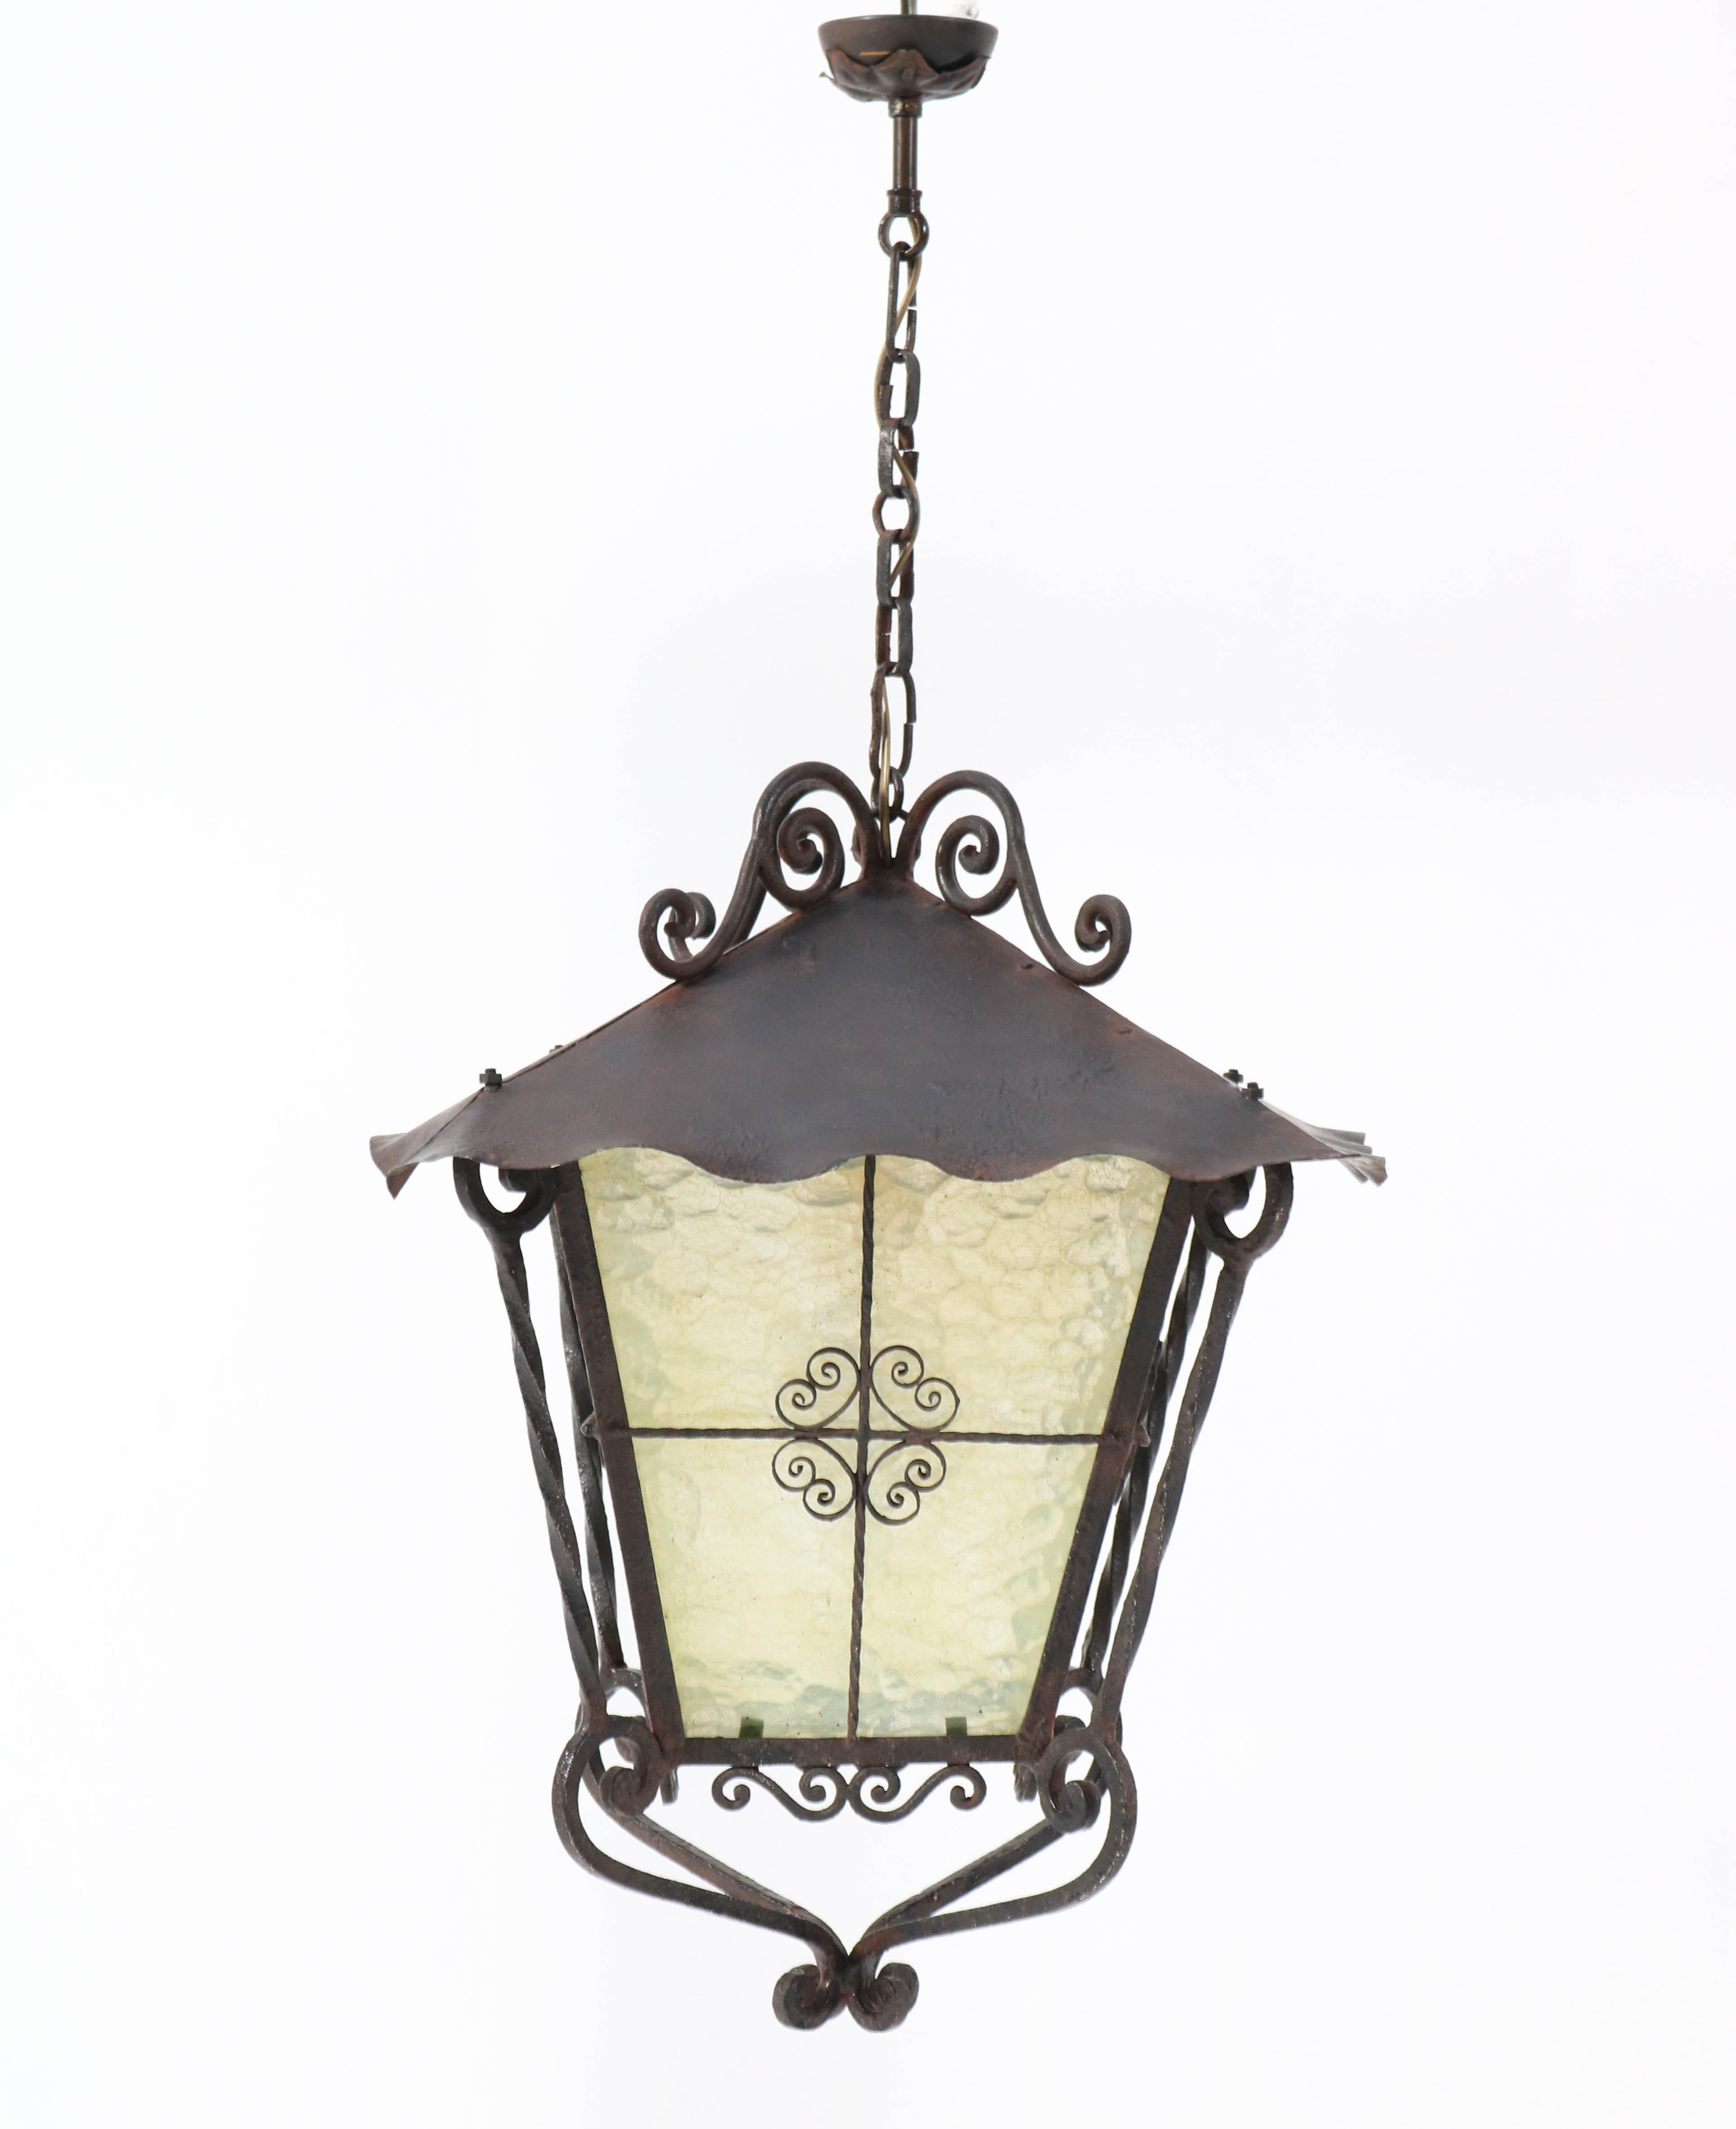 Large French Provincial Wrought Iron Lantern, 1950s For Sale 3